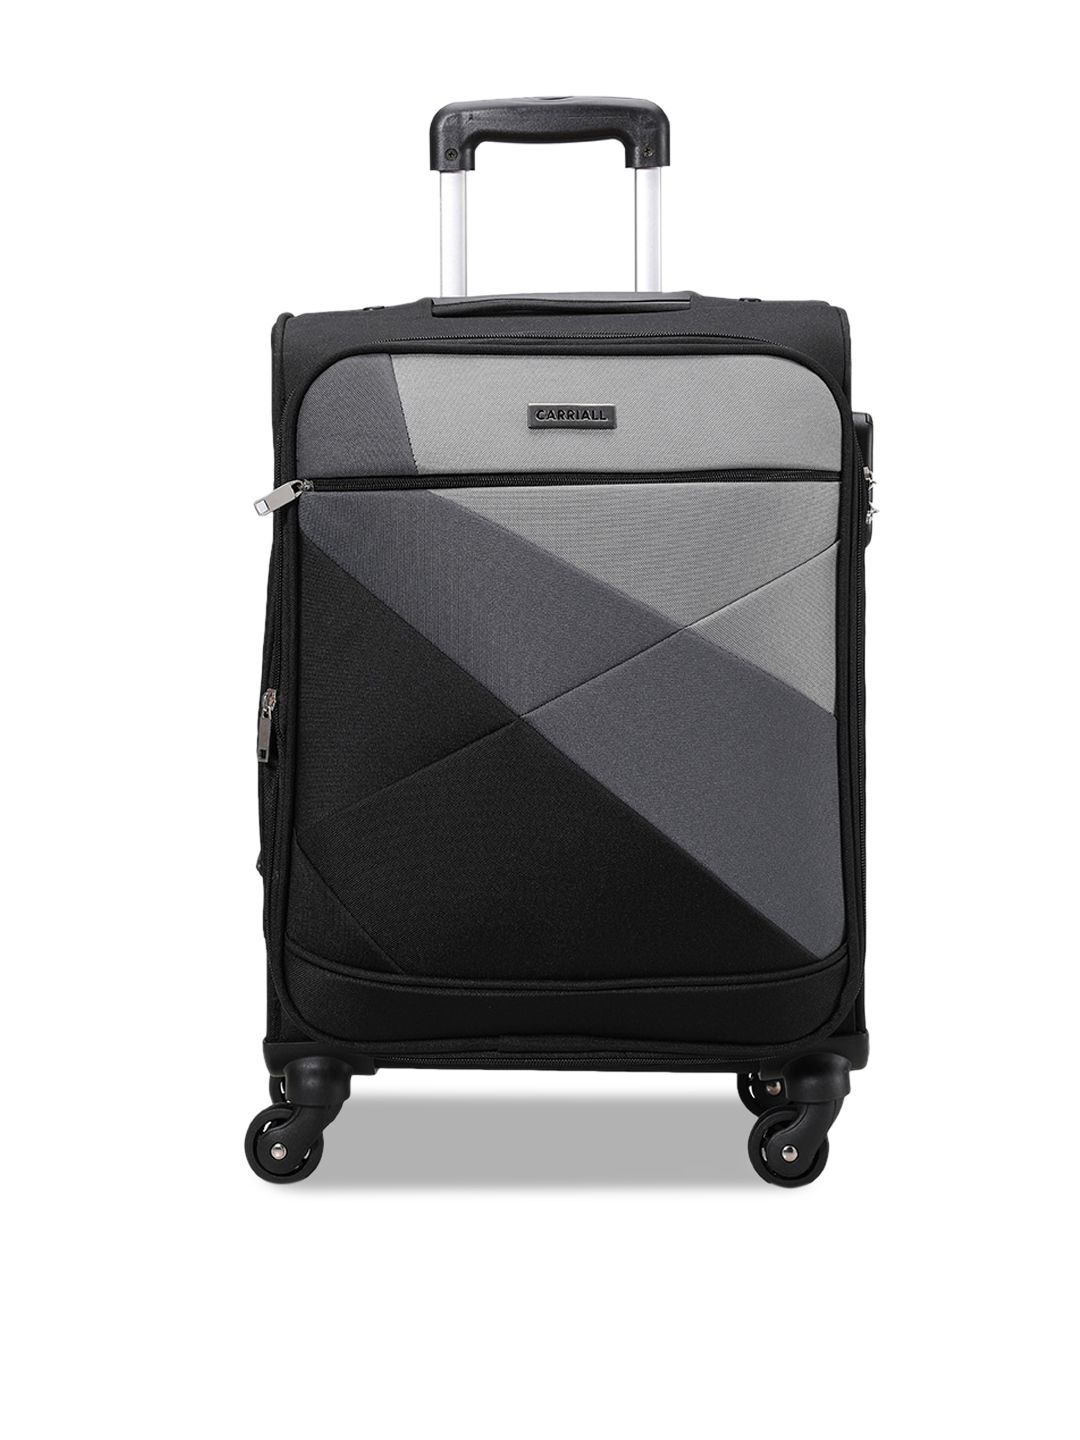 CARRIALL Charcoal Grey Solid Soft-Sided Cabin Trolley Suitcase Price in India